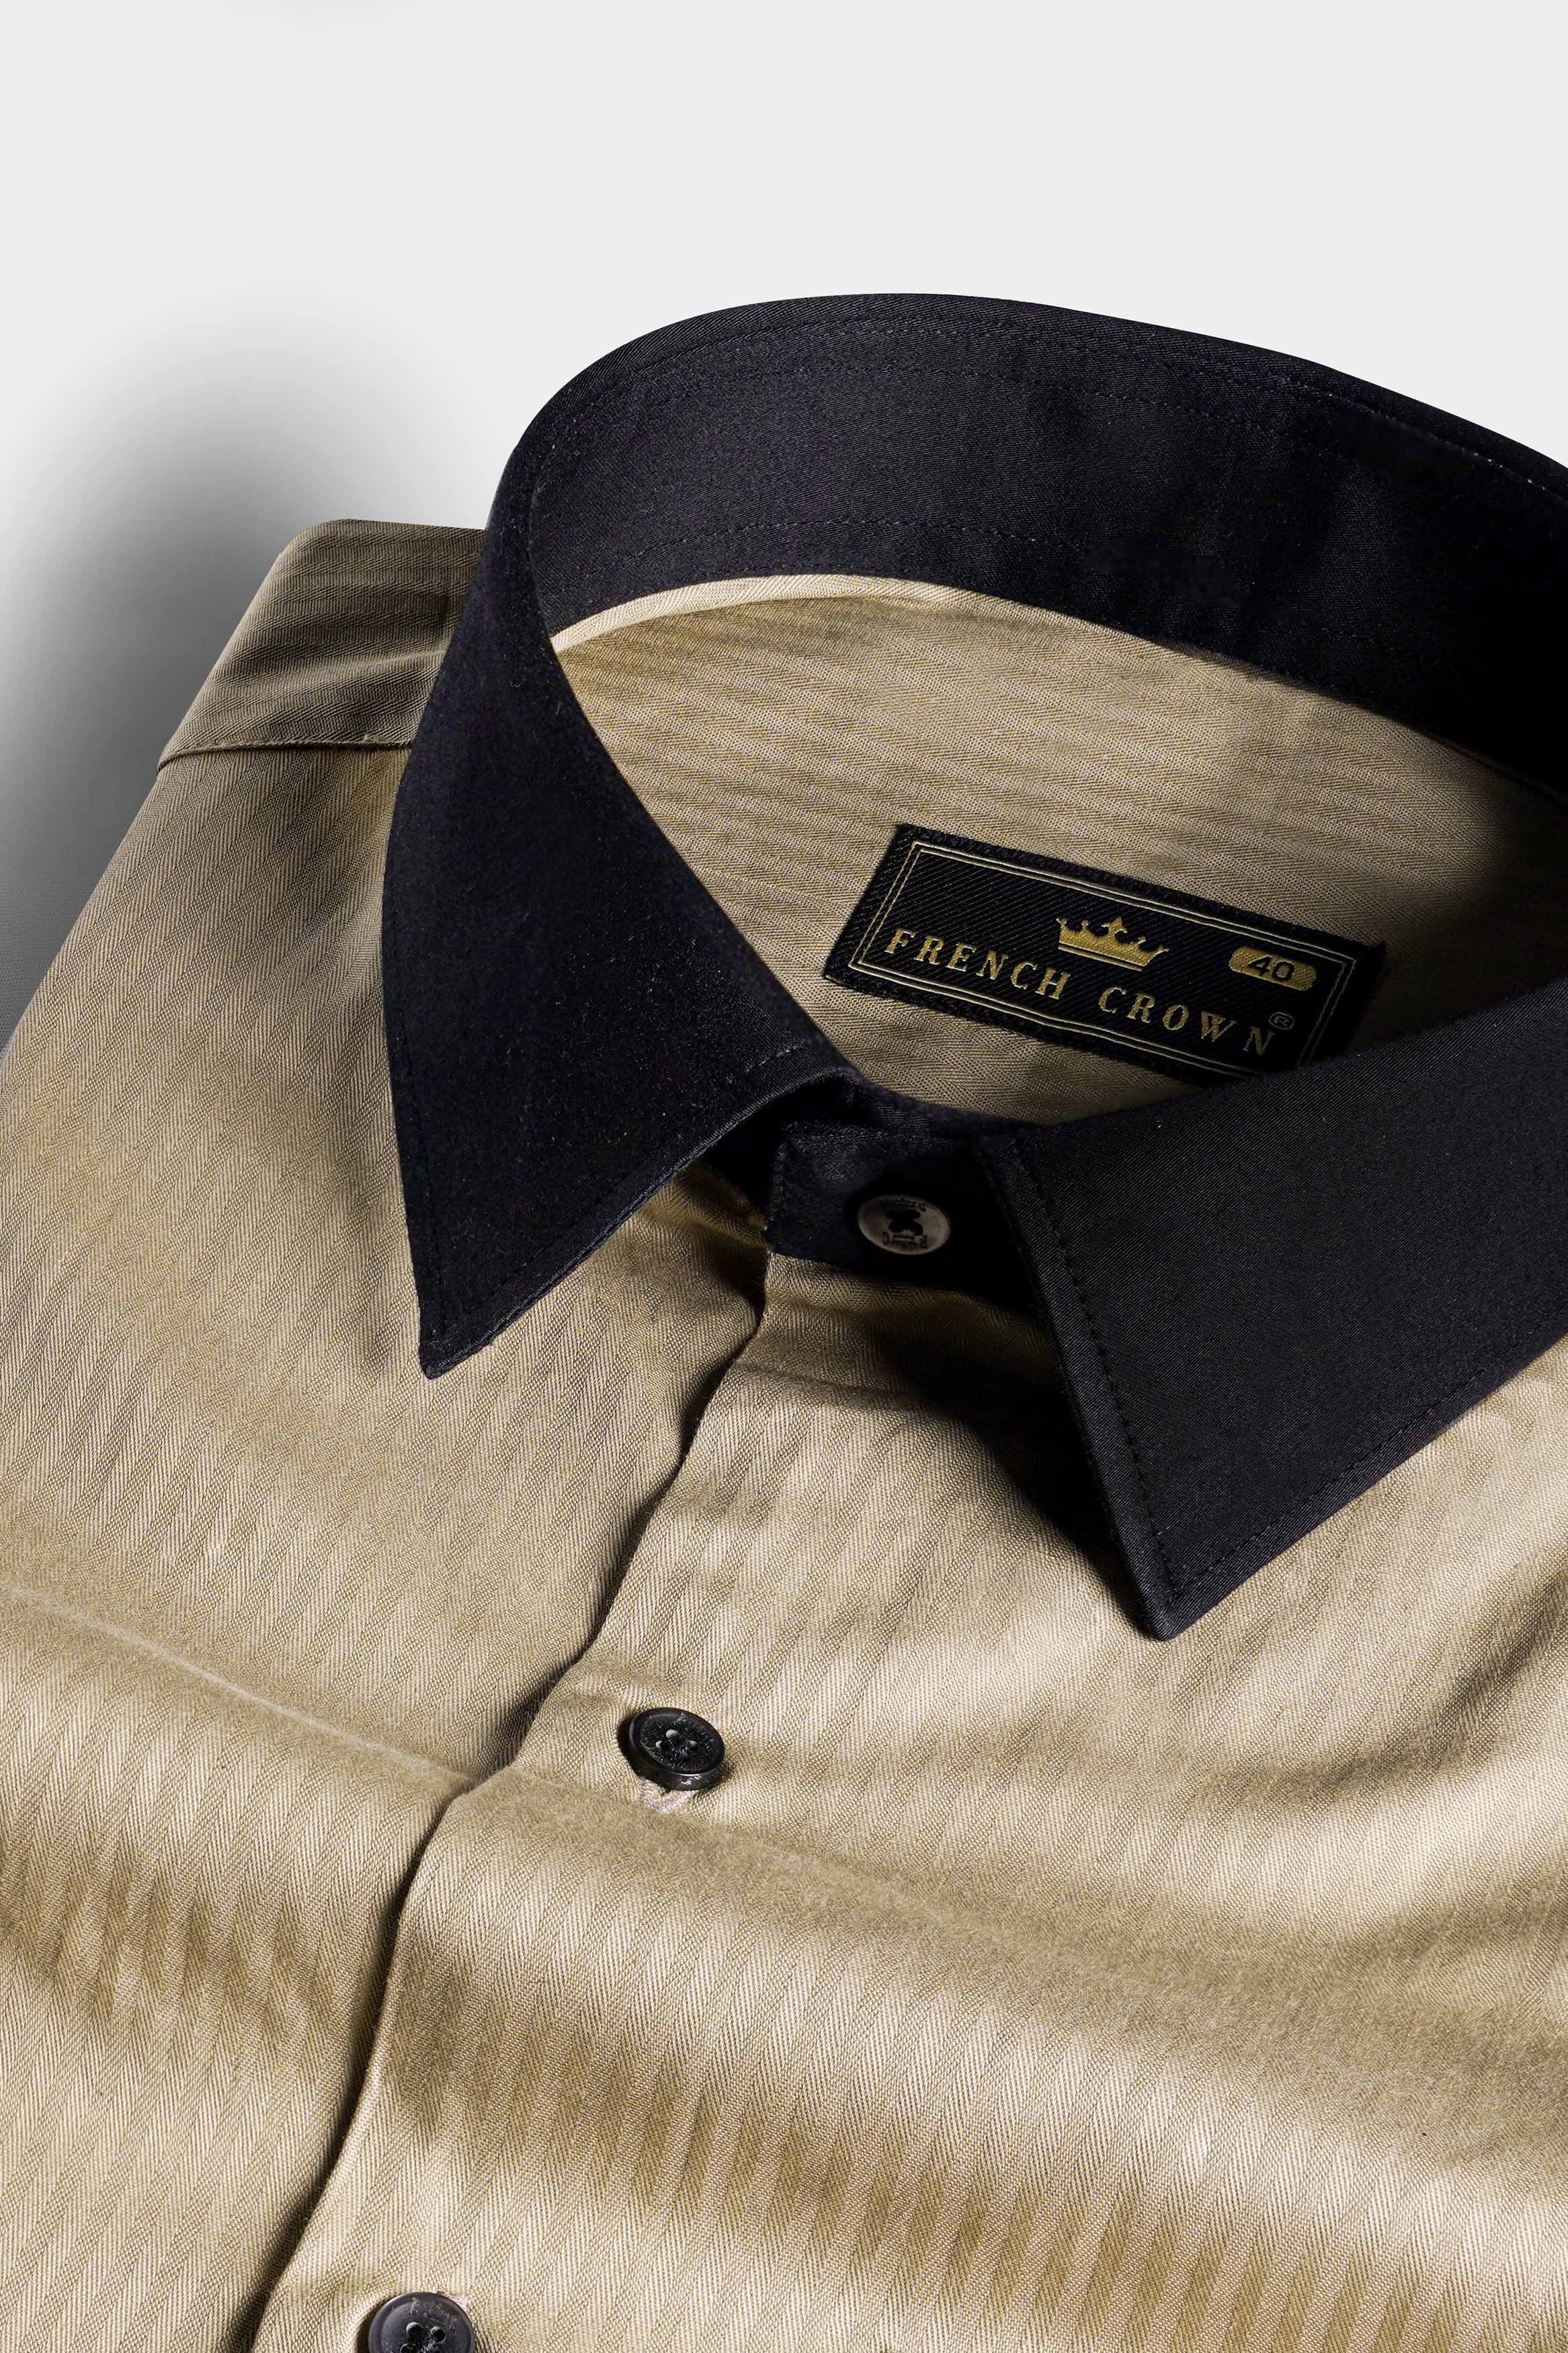 Mongoose Brown Striped with Black Cuffs and Collar Dobby Premium Giza Cotton Shirt